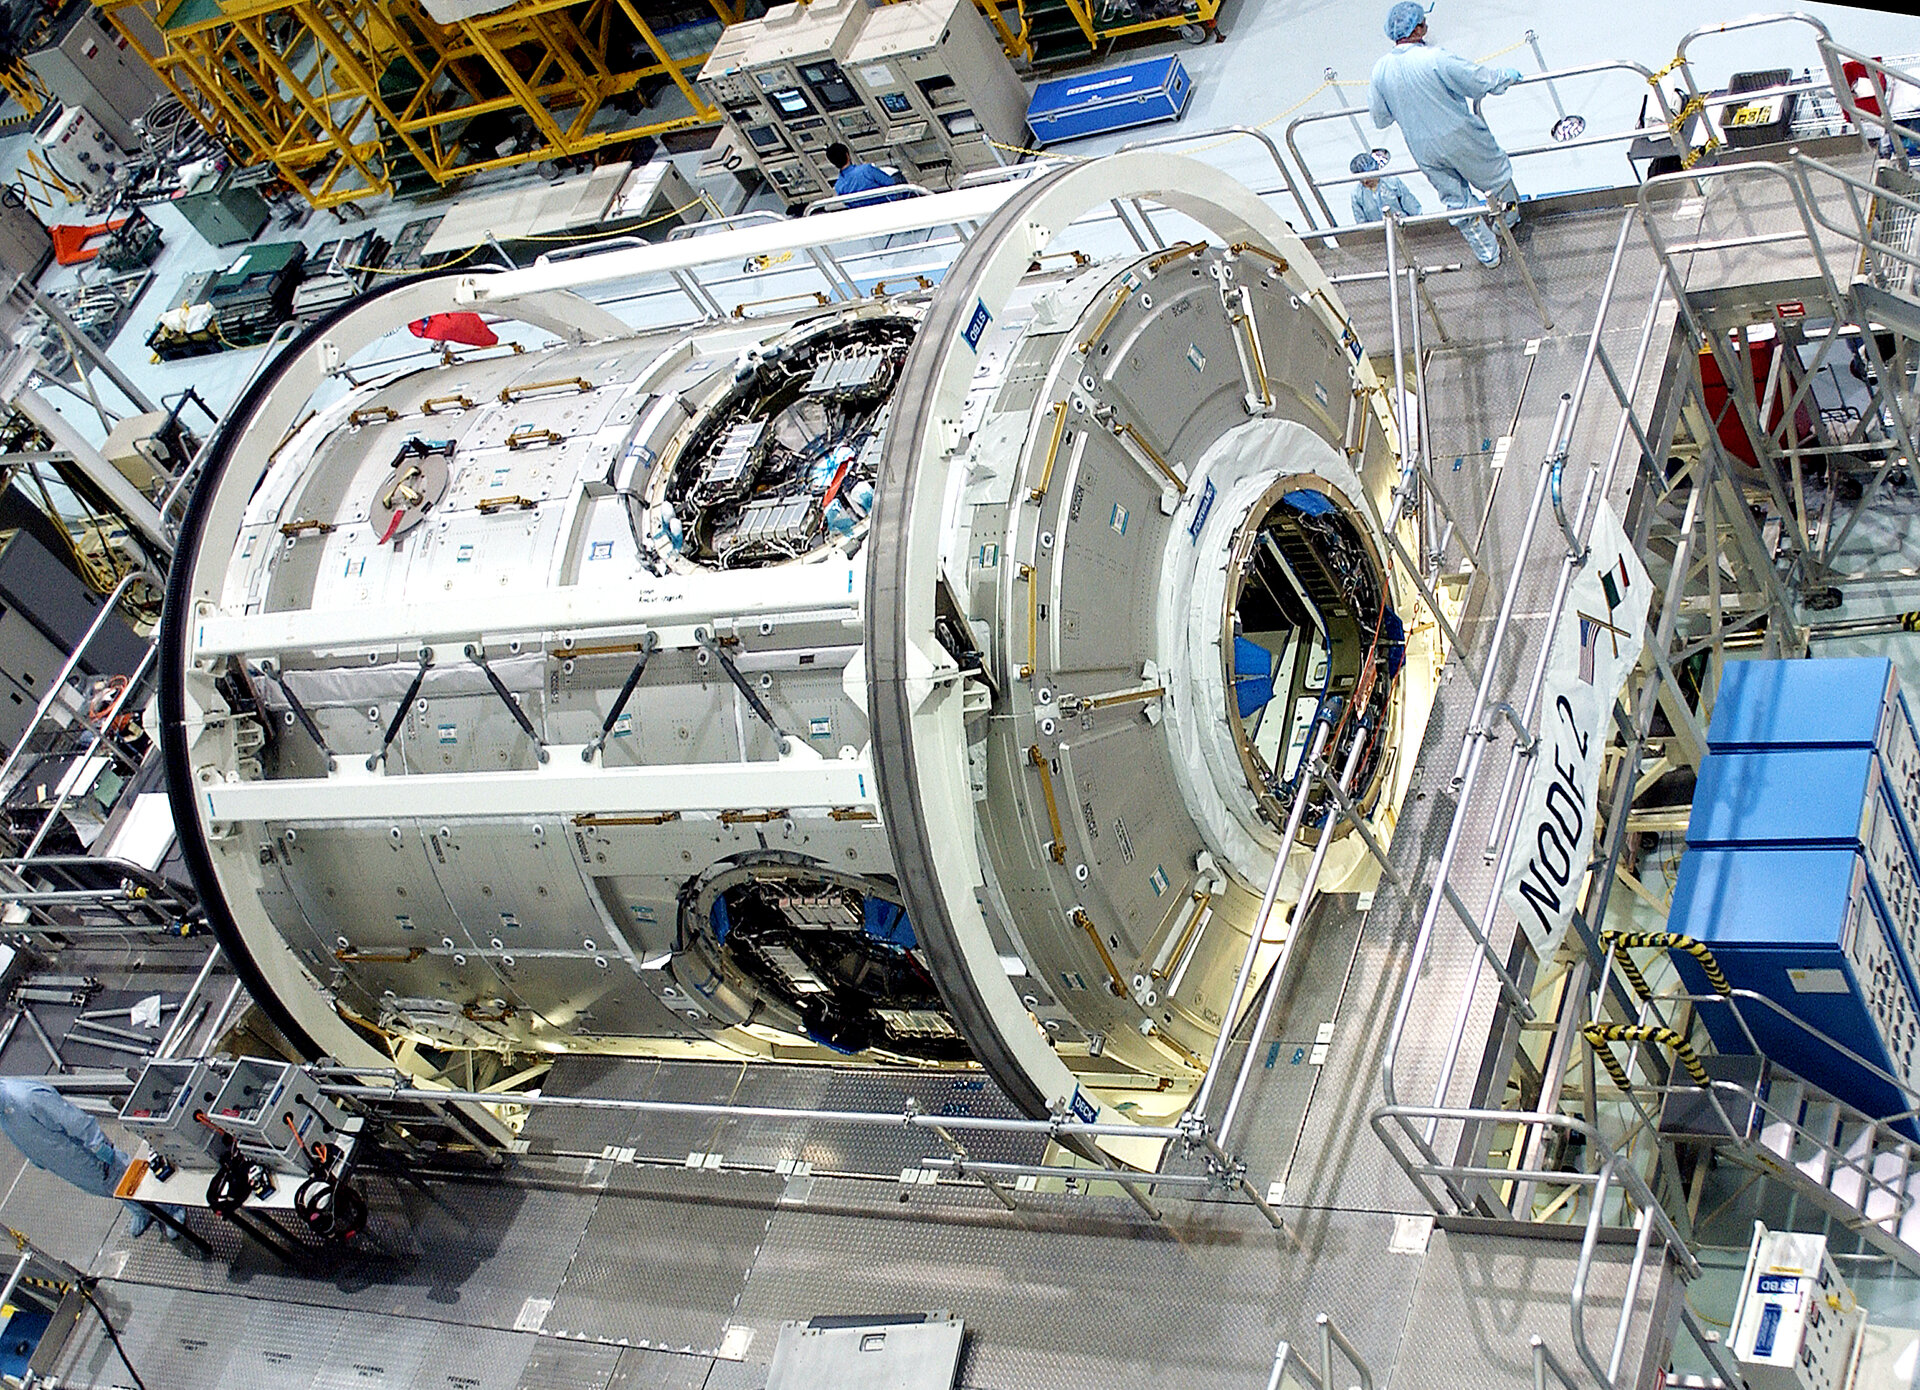 ISS module Node 2 being processed for launch